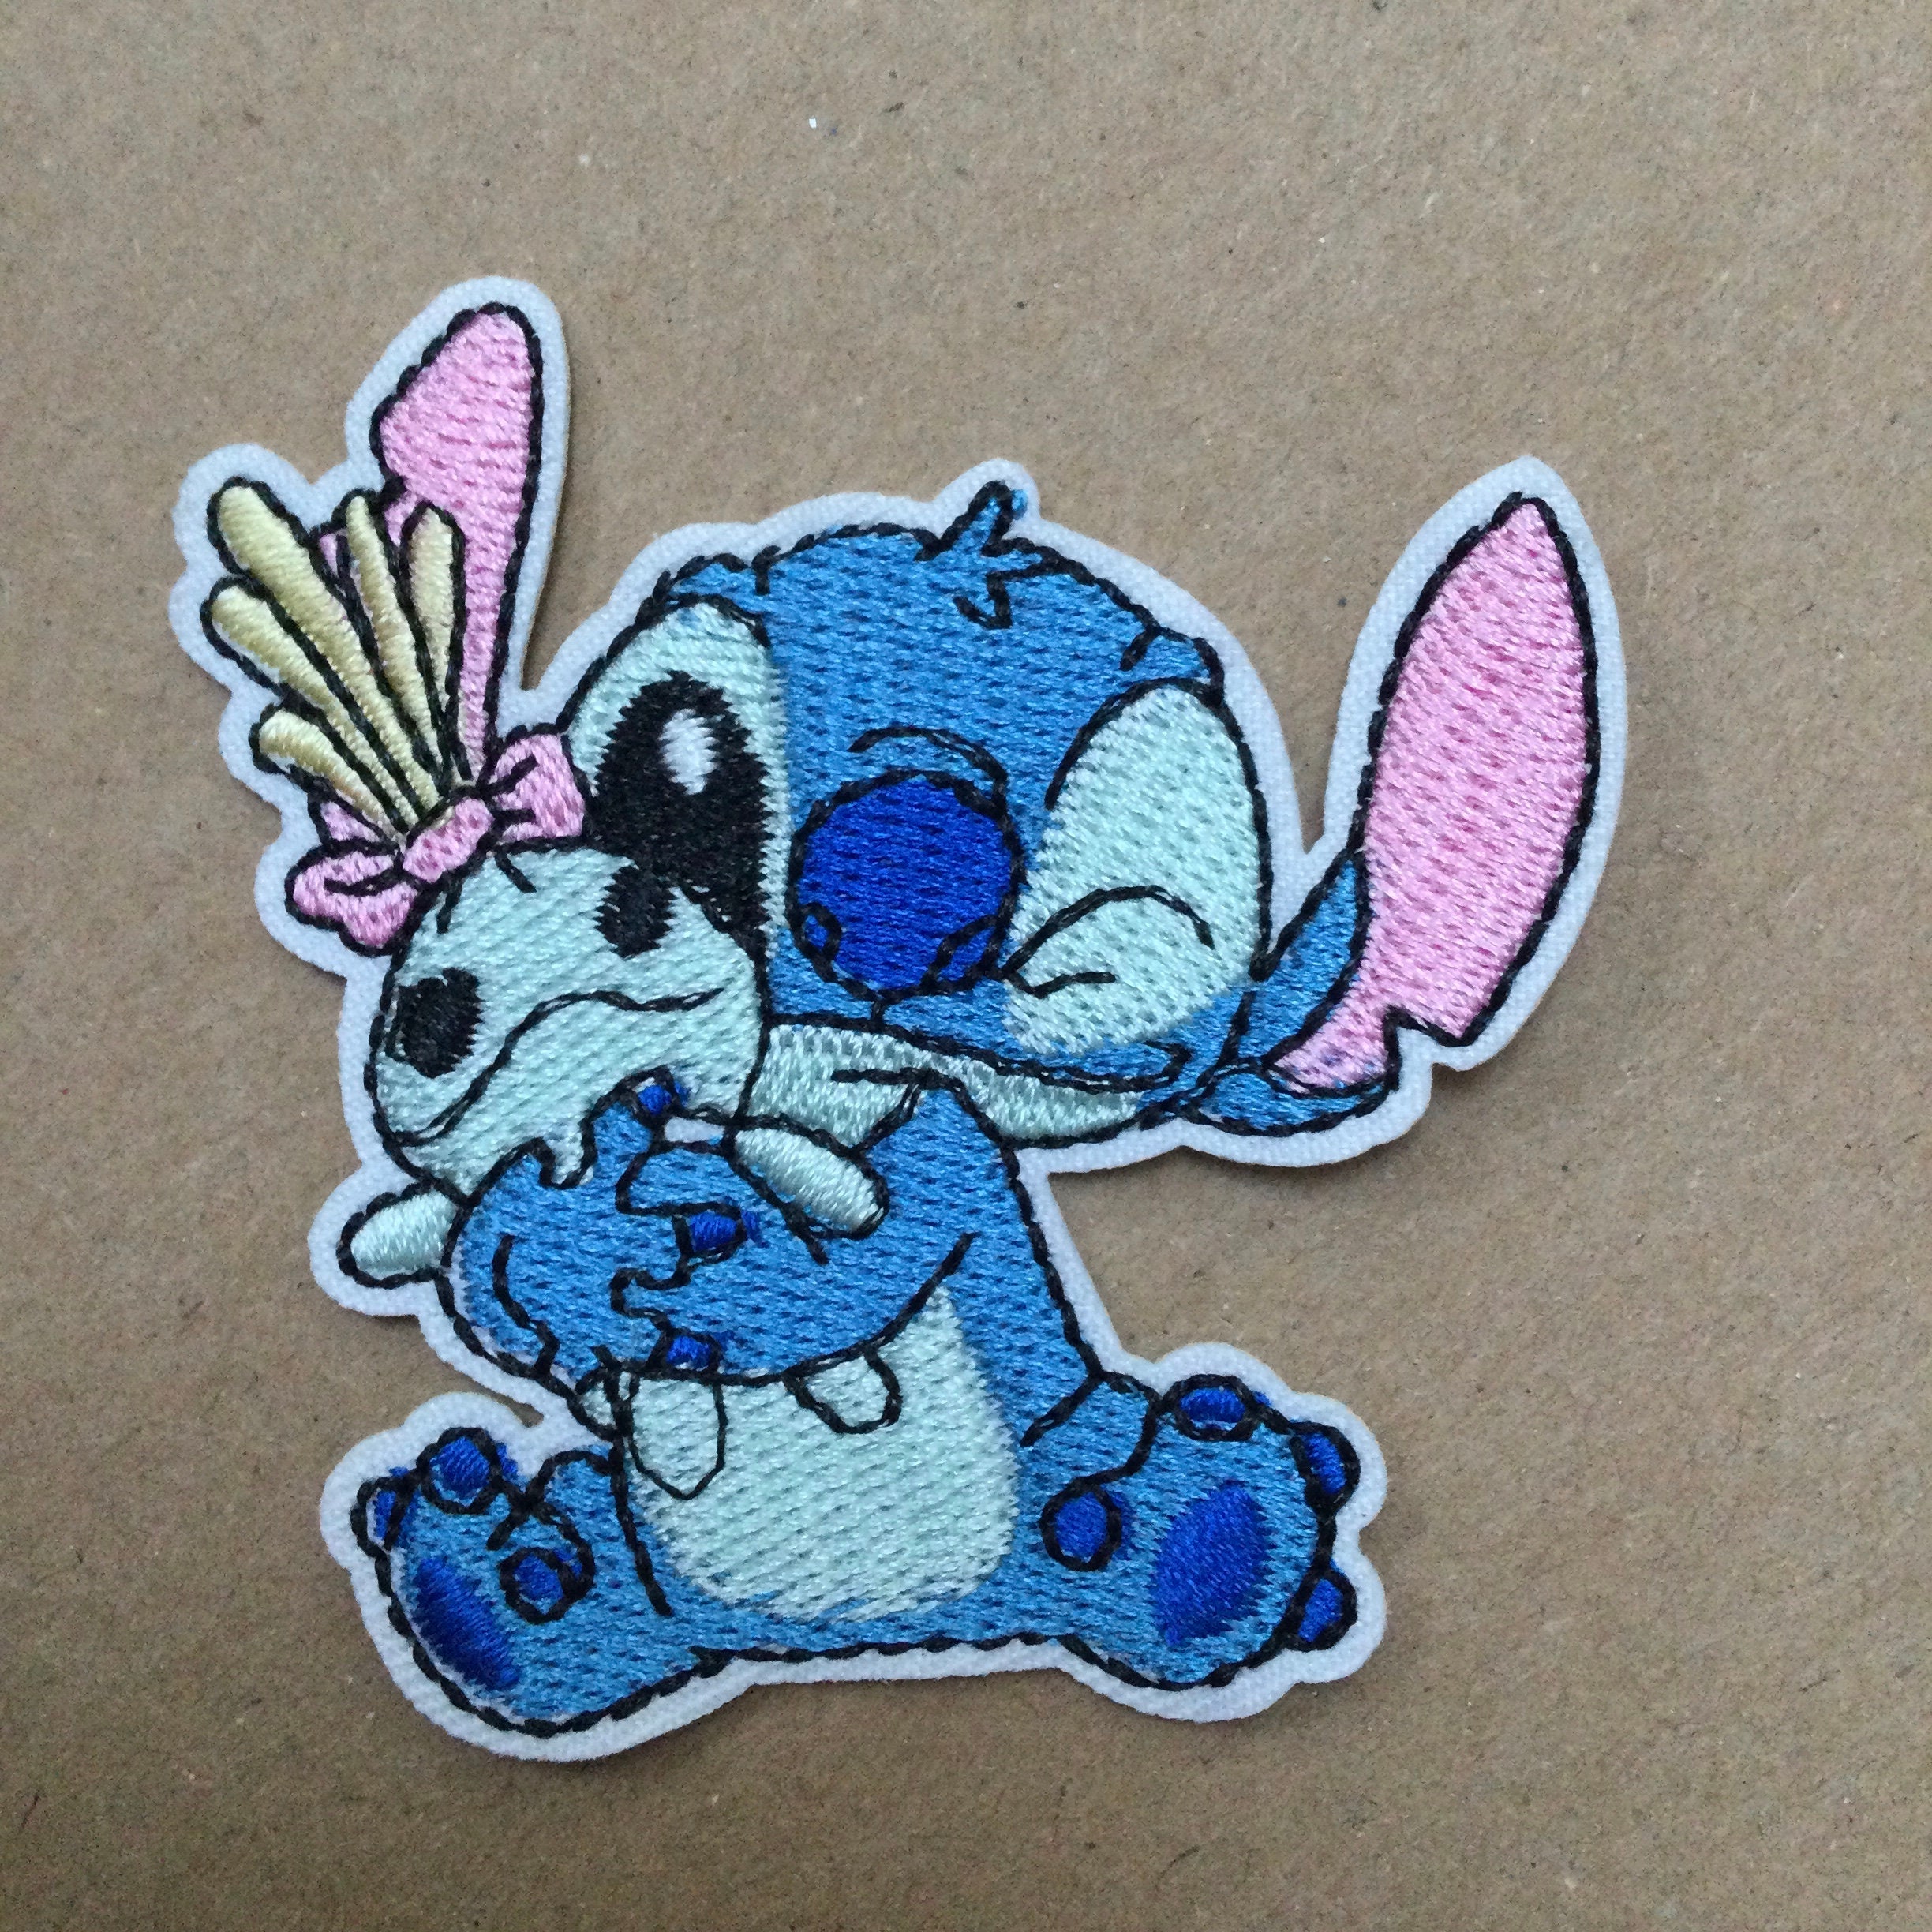 Jumba Jookiba Lilo And Stitch Filled Embroidery Design 2 - Instant Download